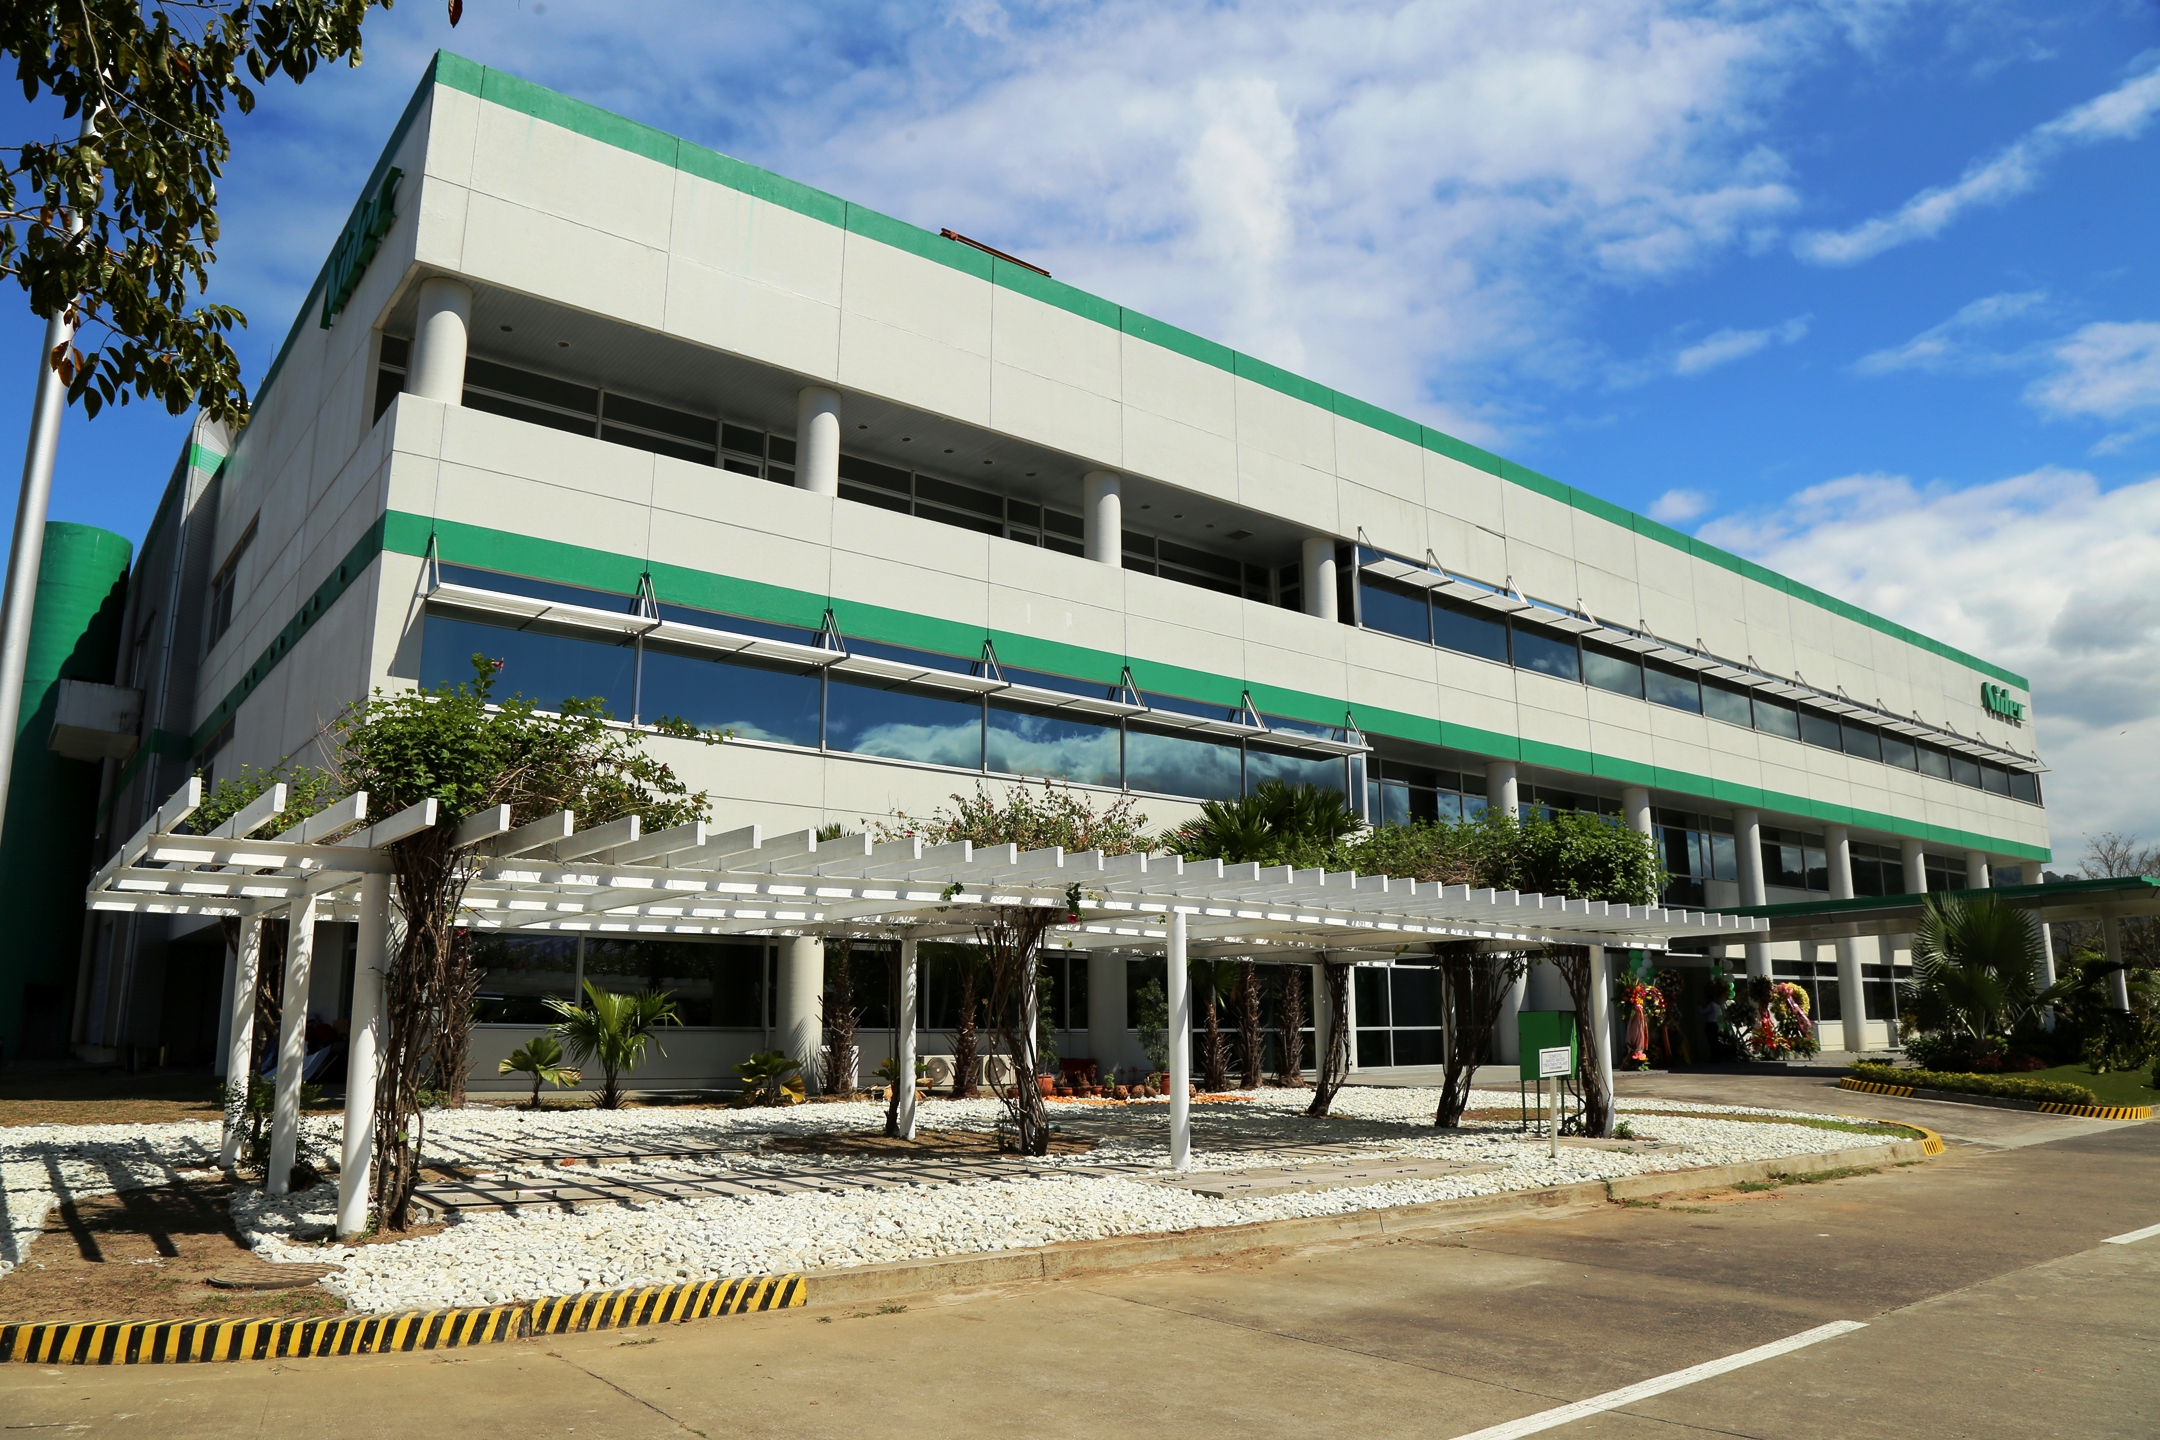 The Nidec manufacturing facility in the Subic Bay Freeport